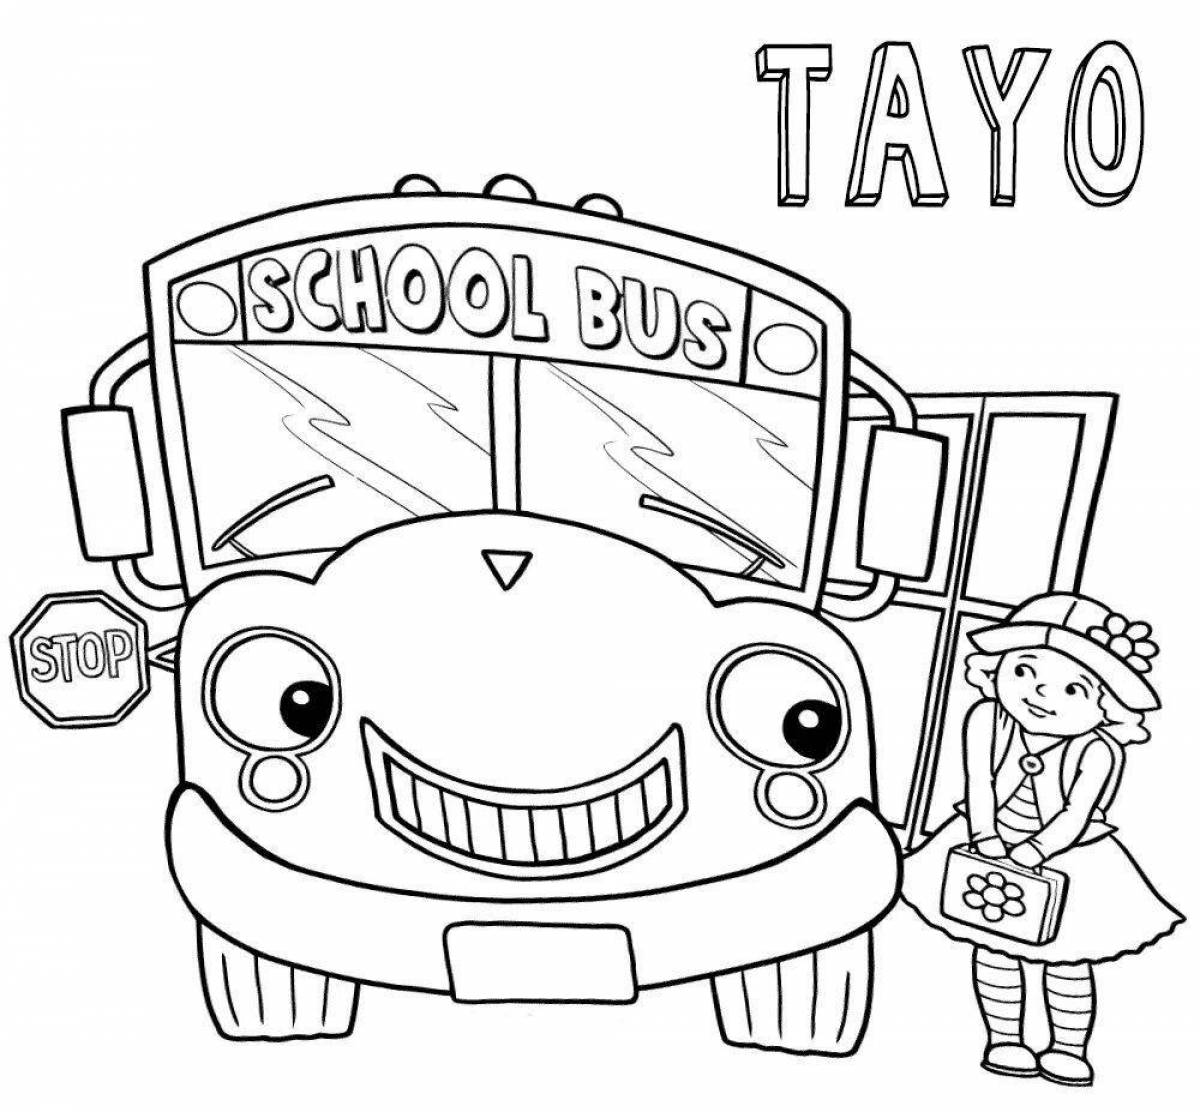 Exciting little bus tayo coloring book